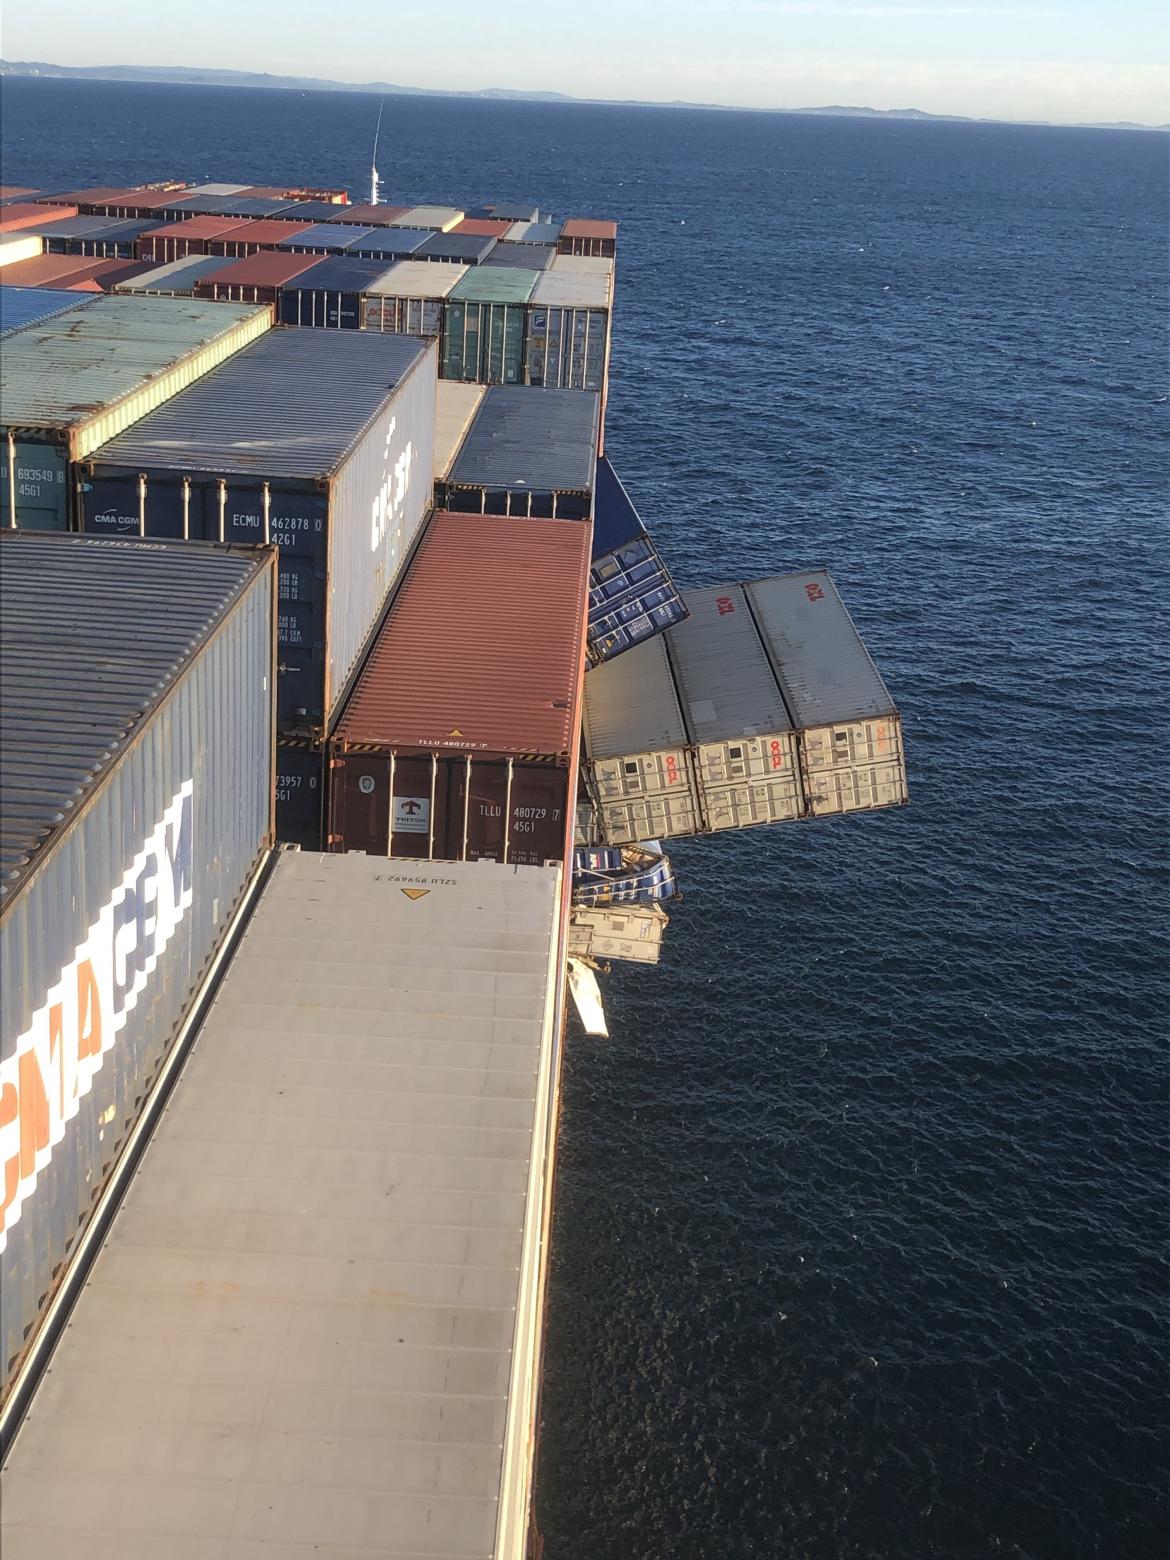 Containers falling